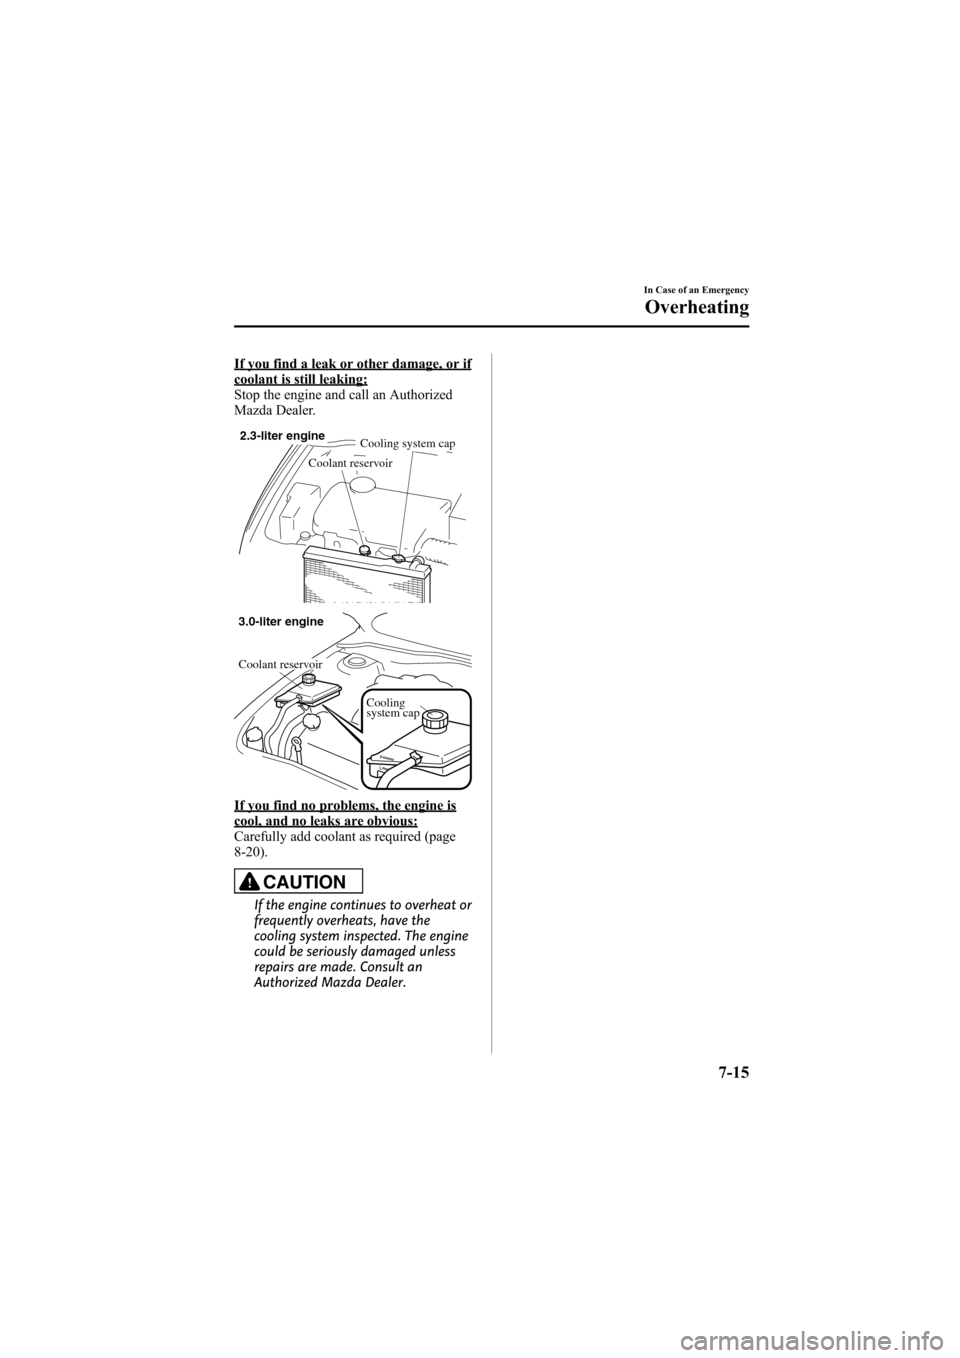 MAZDA MODEL 6 2008  Owners Manual (in English) Black plate (257,1)
If you find a leak or other damage, or ifcoolant is still leaking:
Stop the engine and call an Authorized
Mazda Dealer.
2.3-liter engineCooling system cap
Coolant reservoir
Cooling